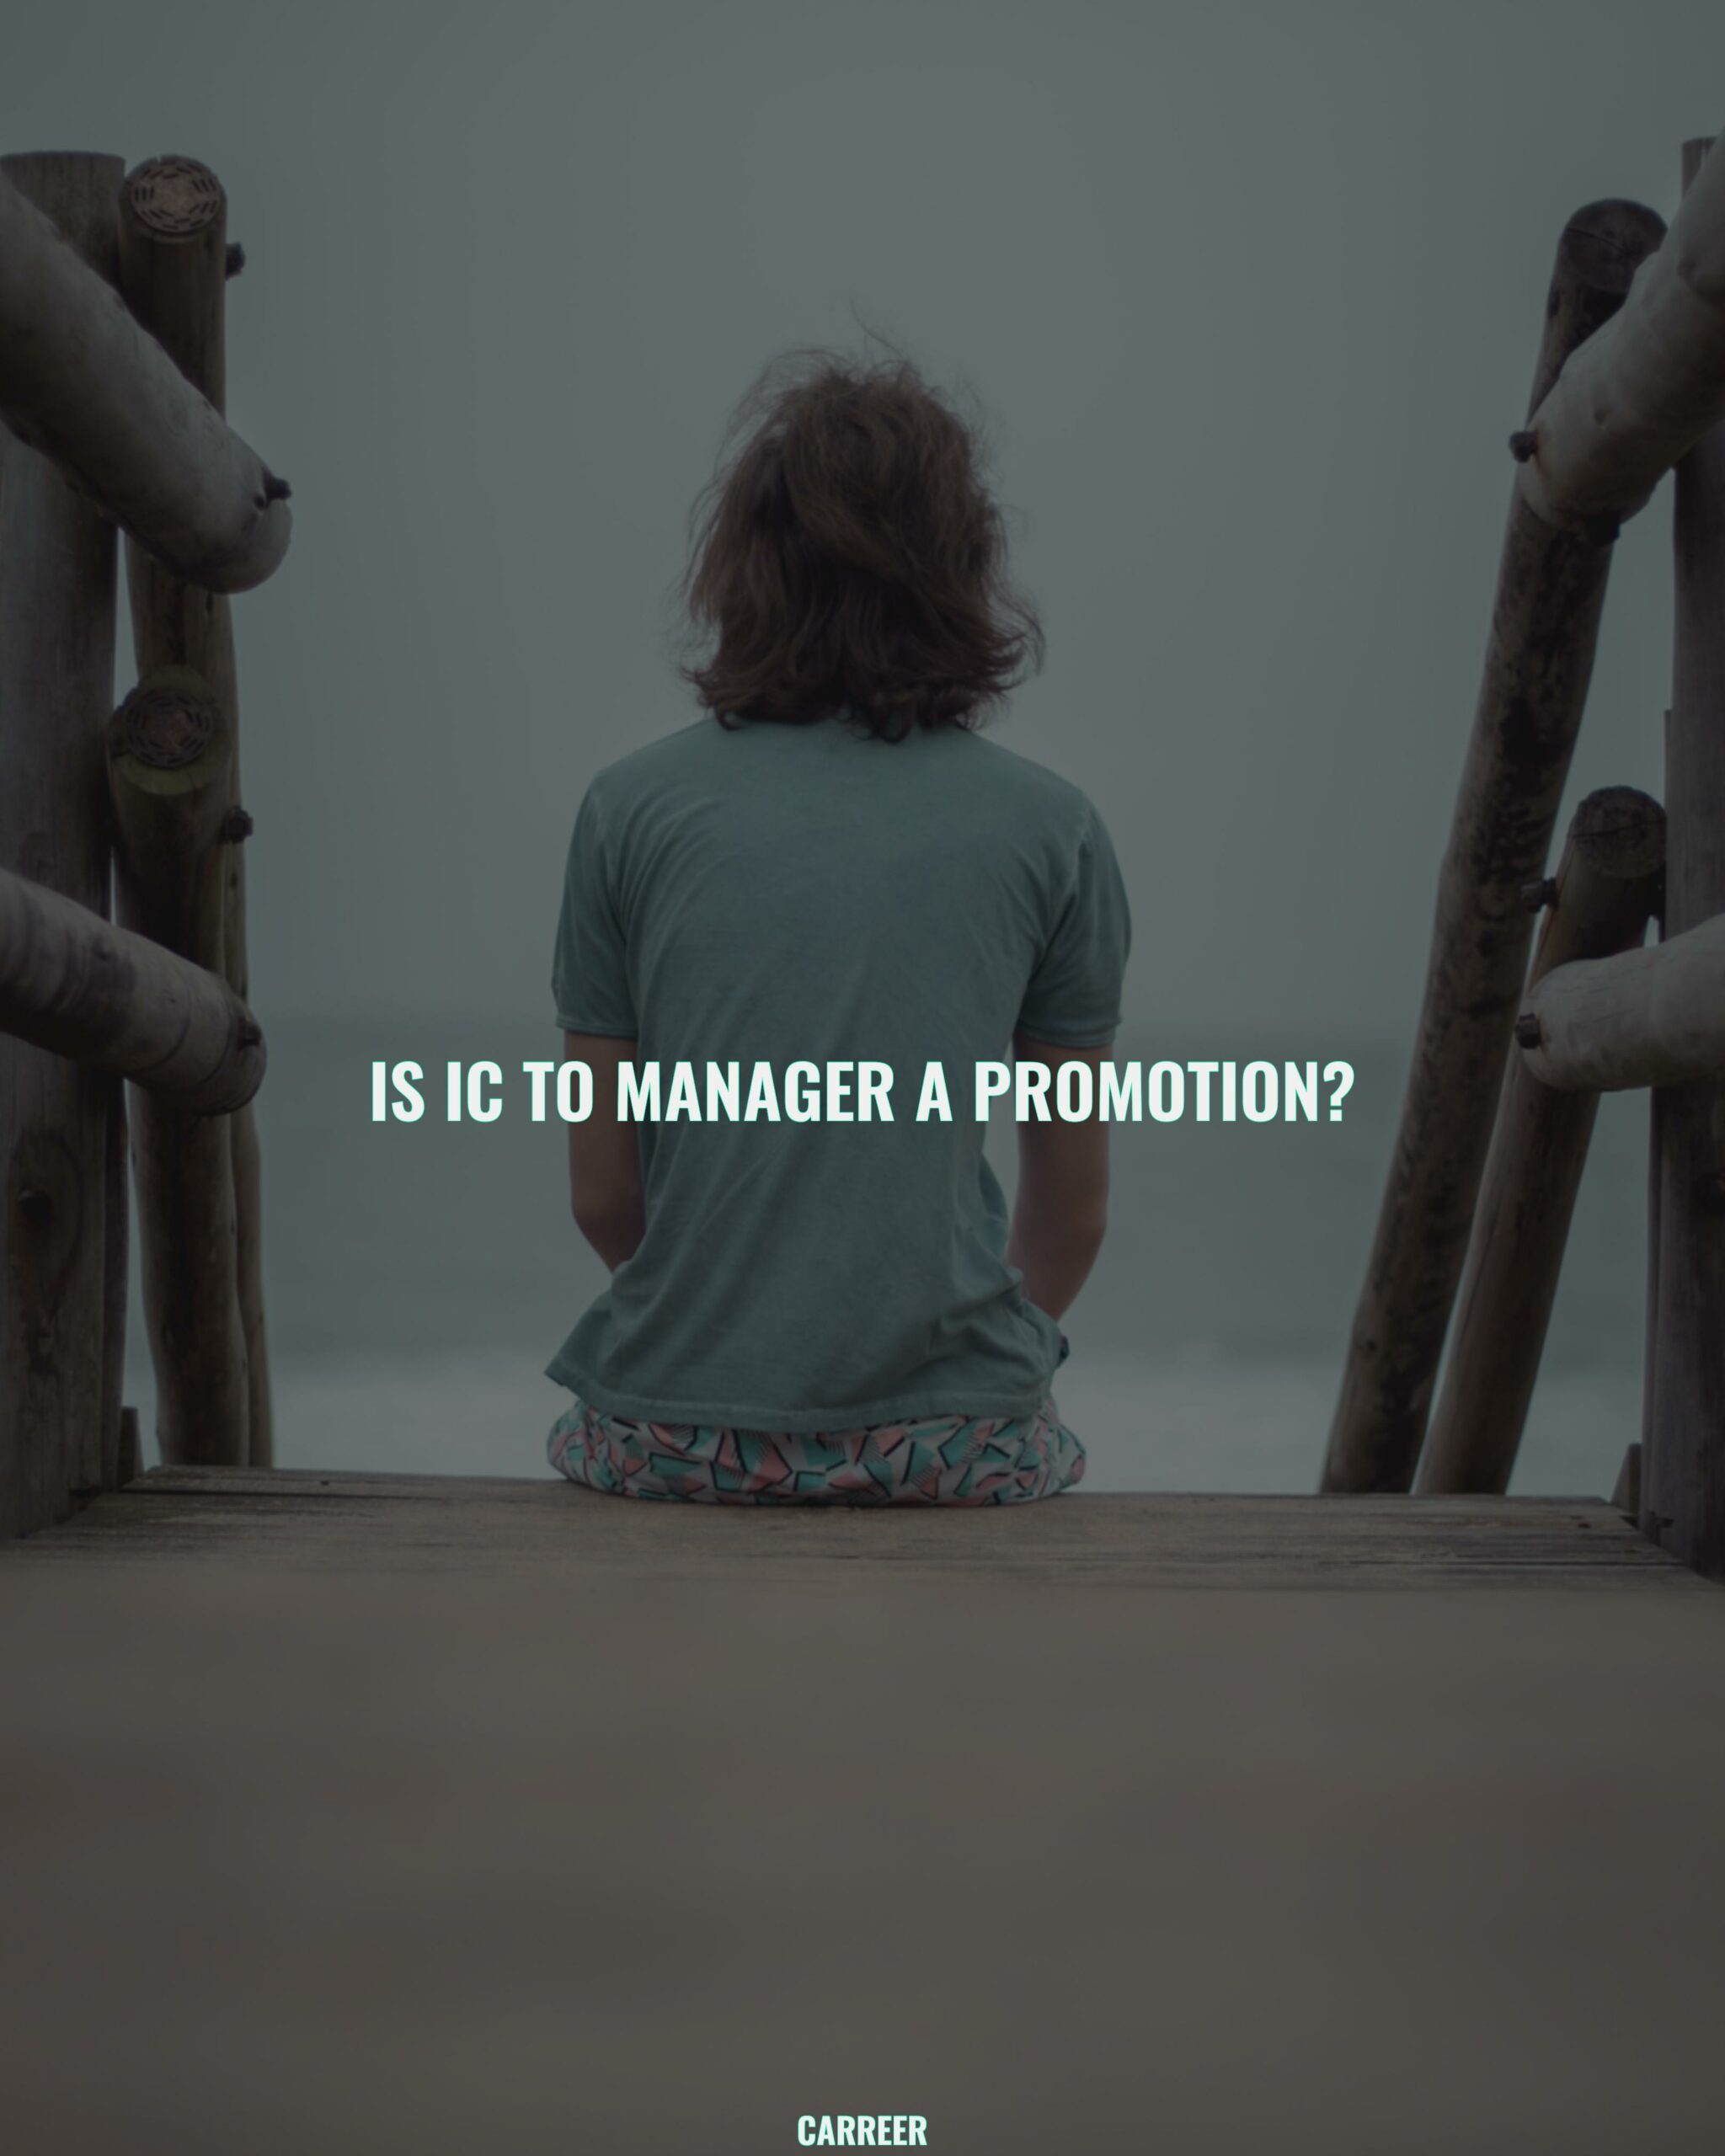 Is ic to manager a promotion?